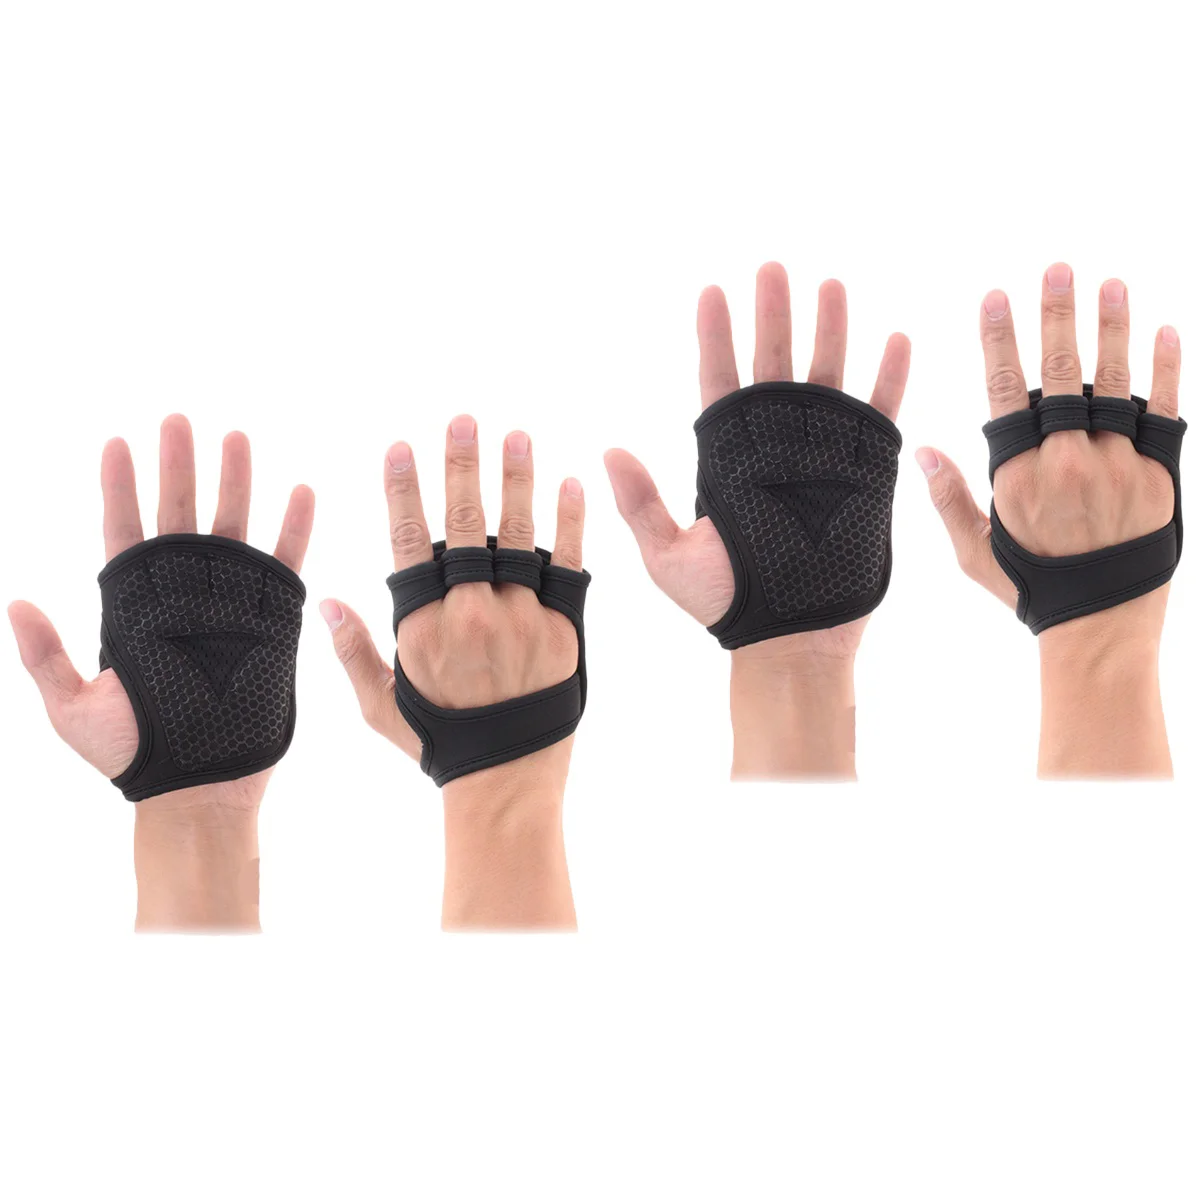 

Set 2 Half Finger Gloves Biking Weightlifting Rowing Protective Workout Mitts Sports Fingerless